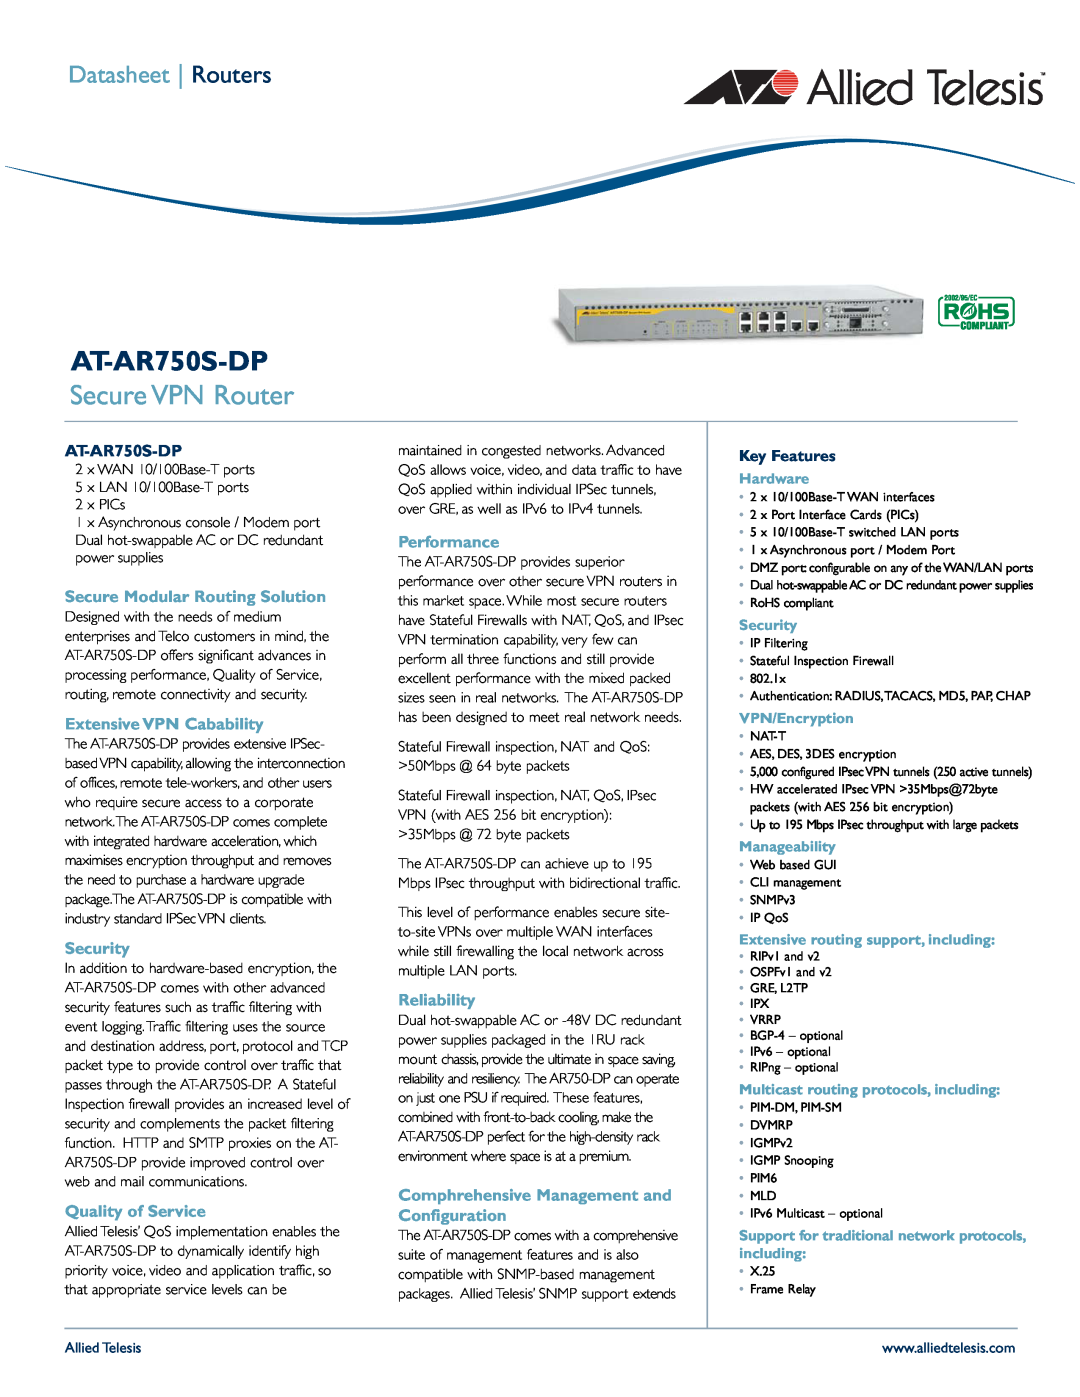 Allied Telesis AT-AR750S-dp manual Secure VPN Router, AT-AR750S-DP, Datasheet Routers, Key Features, Hardware, Security 